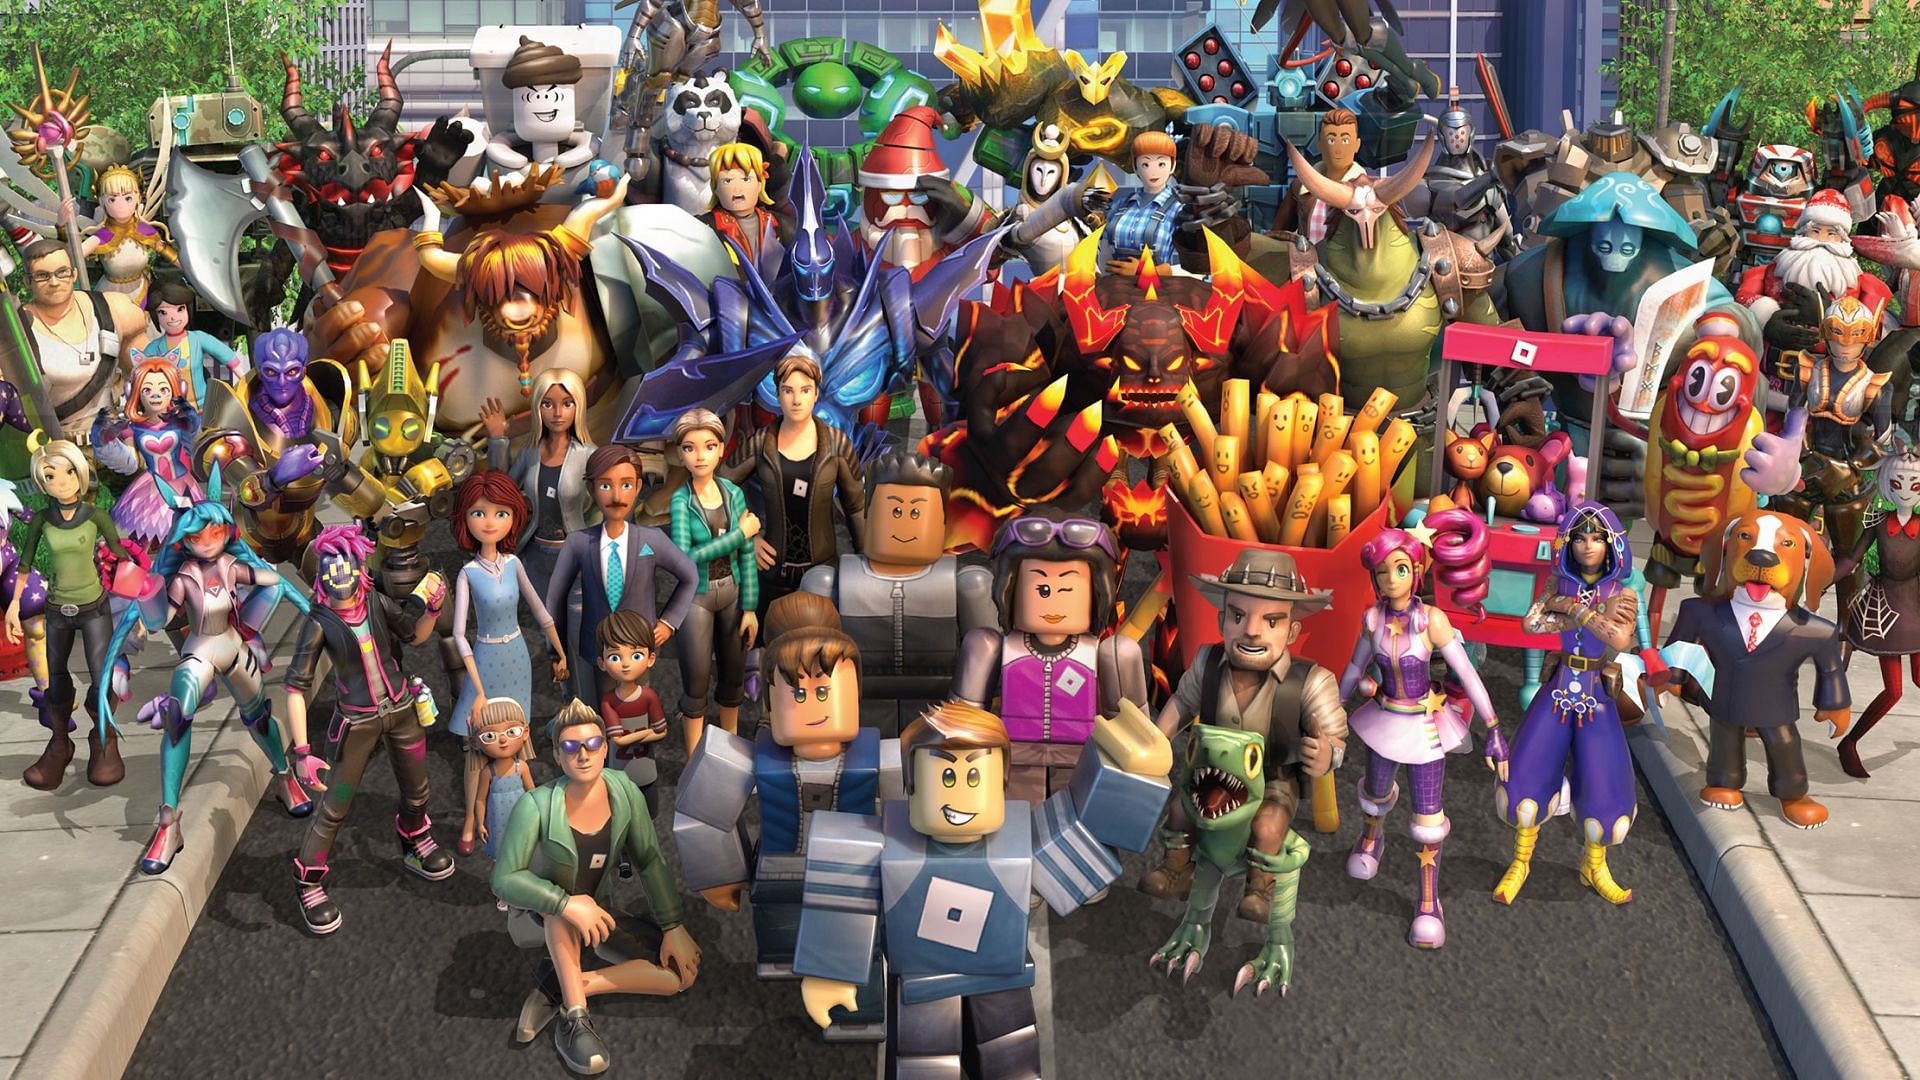 Multiplayer games on Roblox (Image via Roblox)